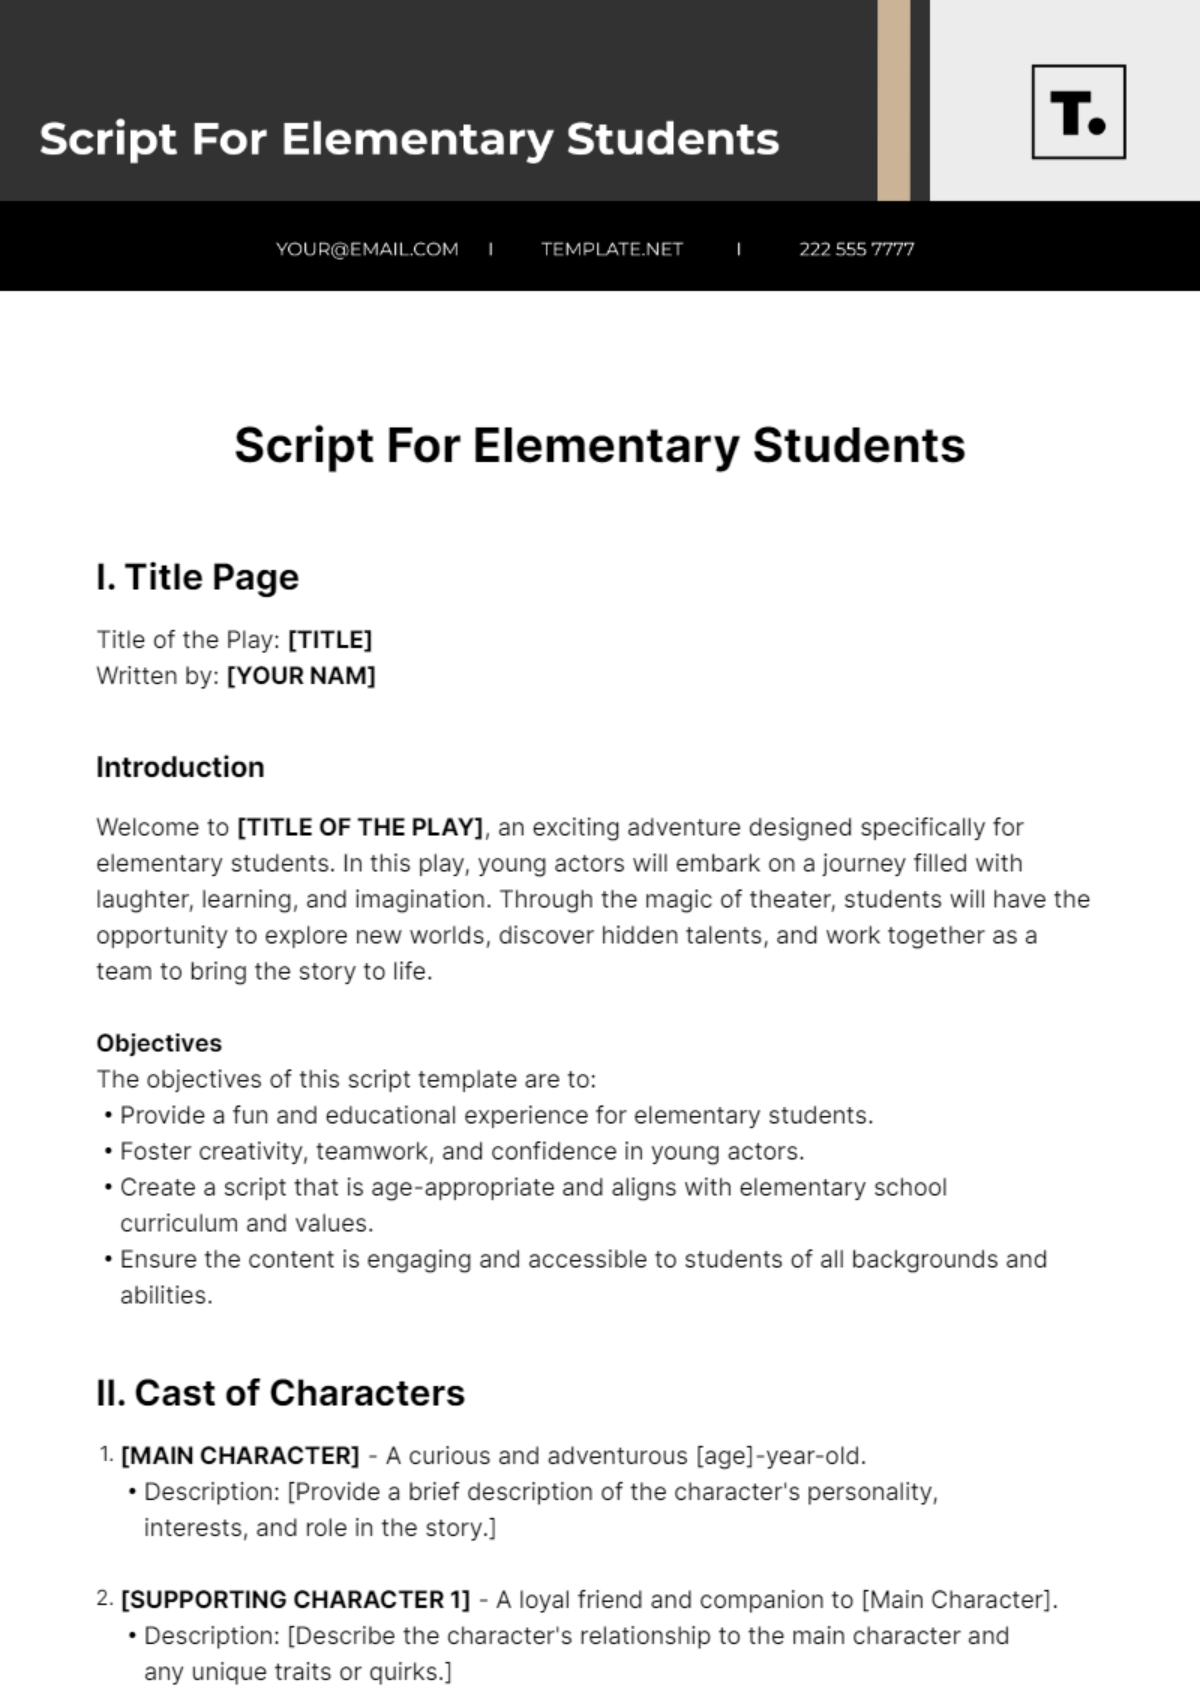 Script For Elementary Students Template